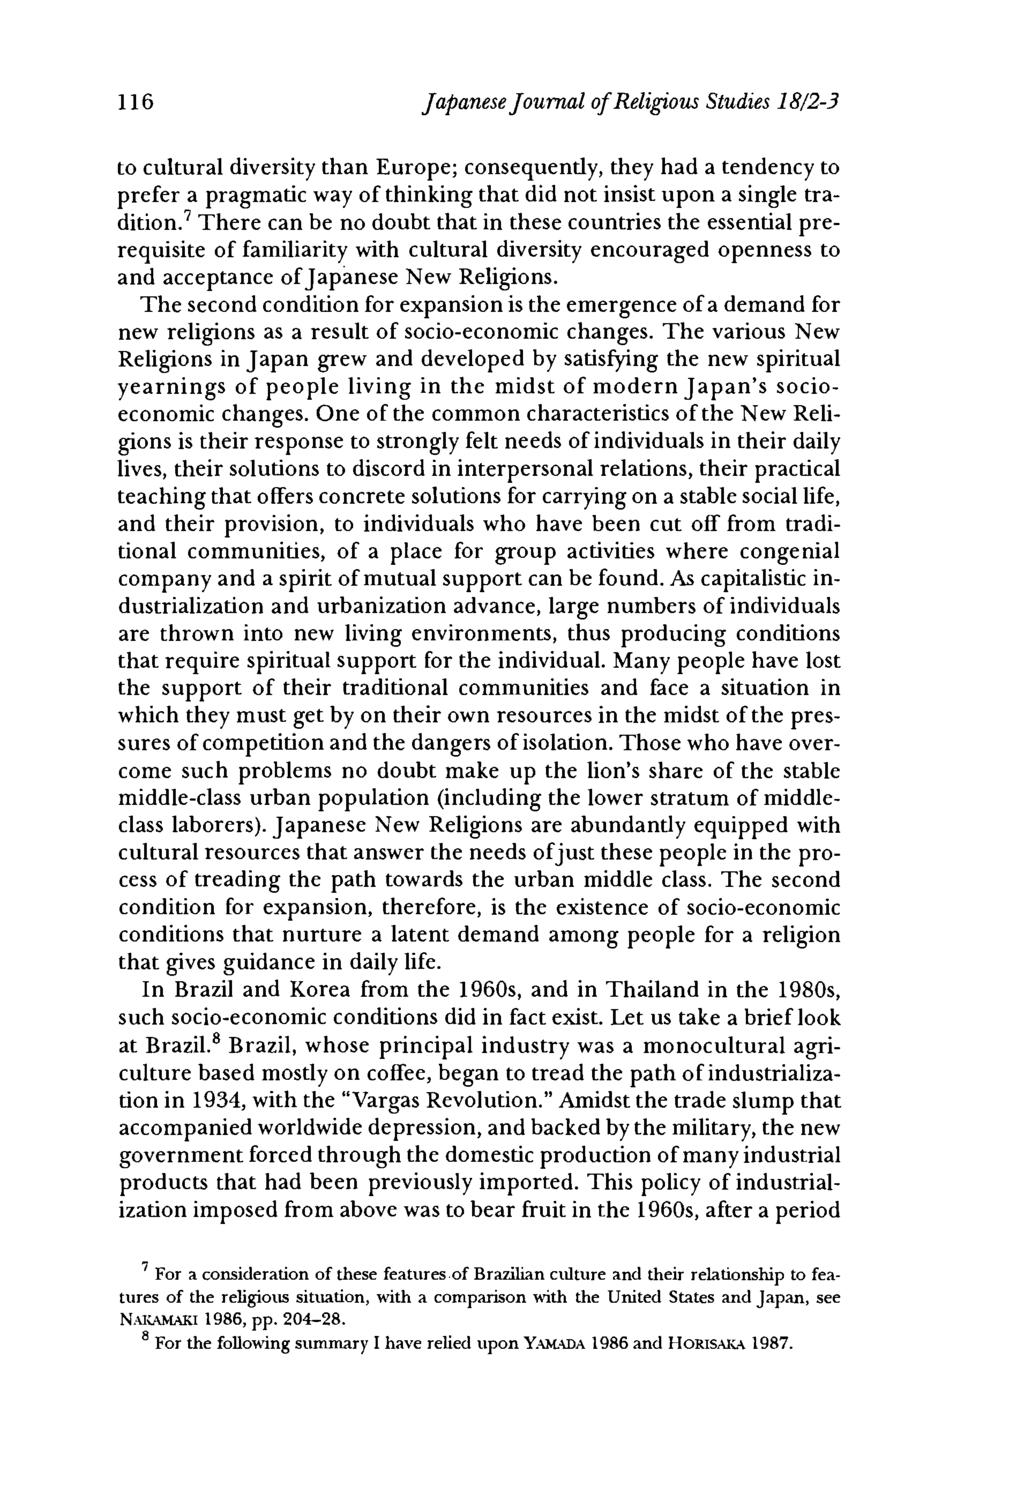 116 Japanese Journal of Religious Studies 18/2-3 to cultural diversity than Europe; consequently,they had a tendency to prefer a pragmatic way of thinking that did not insist upon a single tradition.